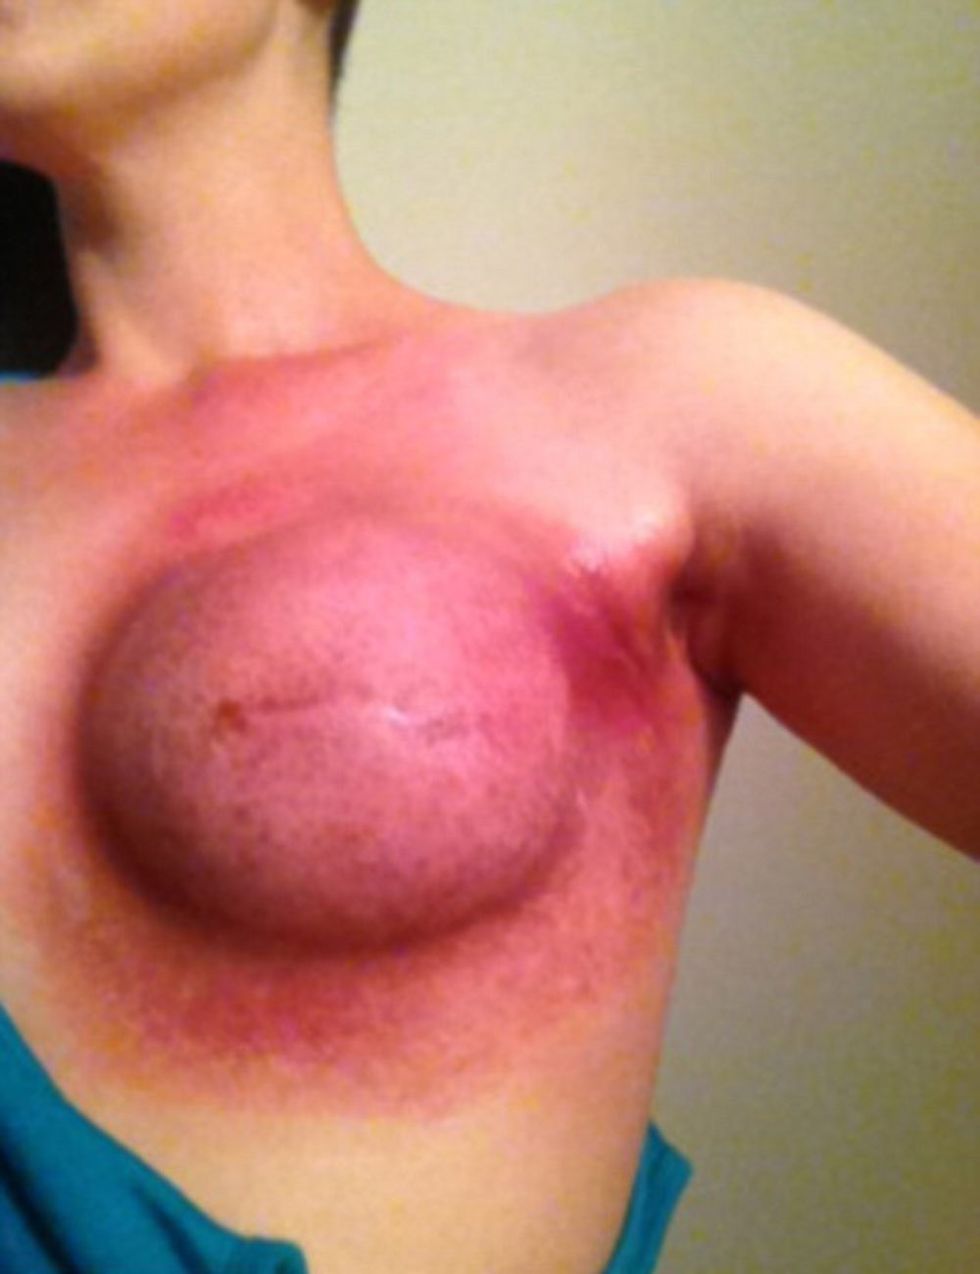 Woman shares graphic post-treatment photos to reveal the devastating effects of the disease